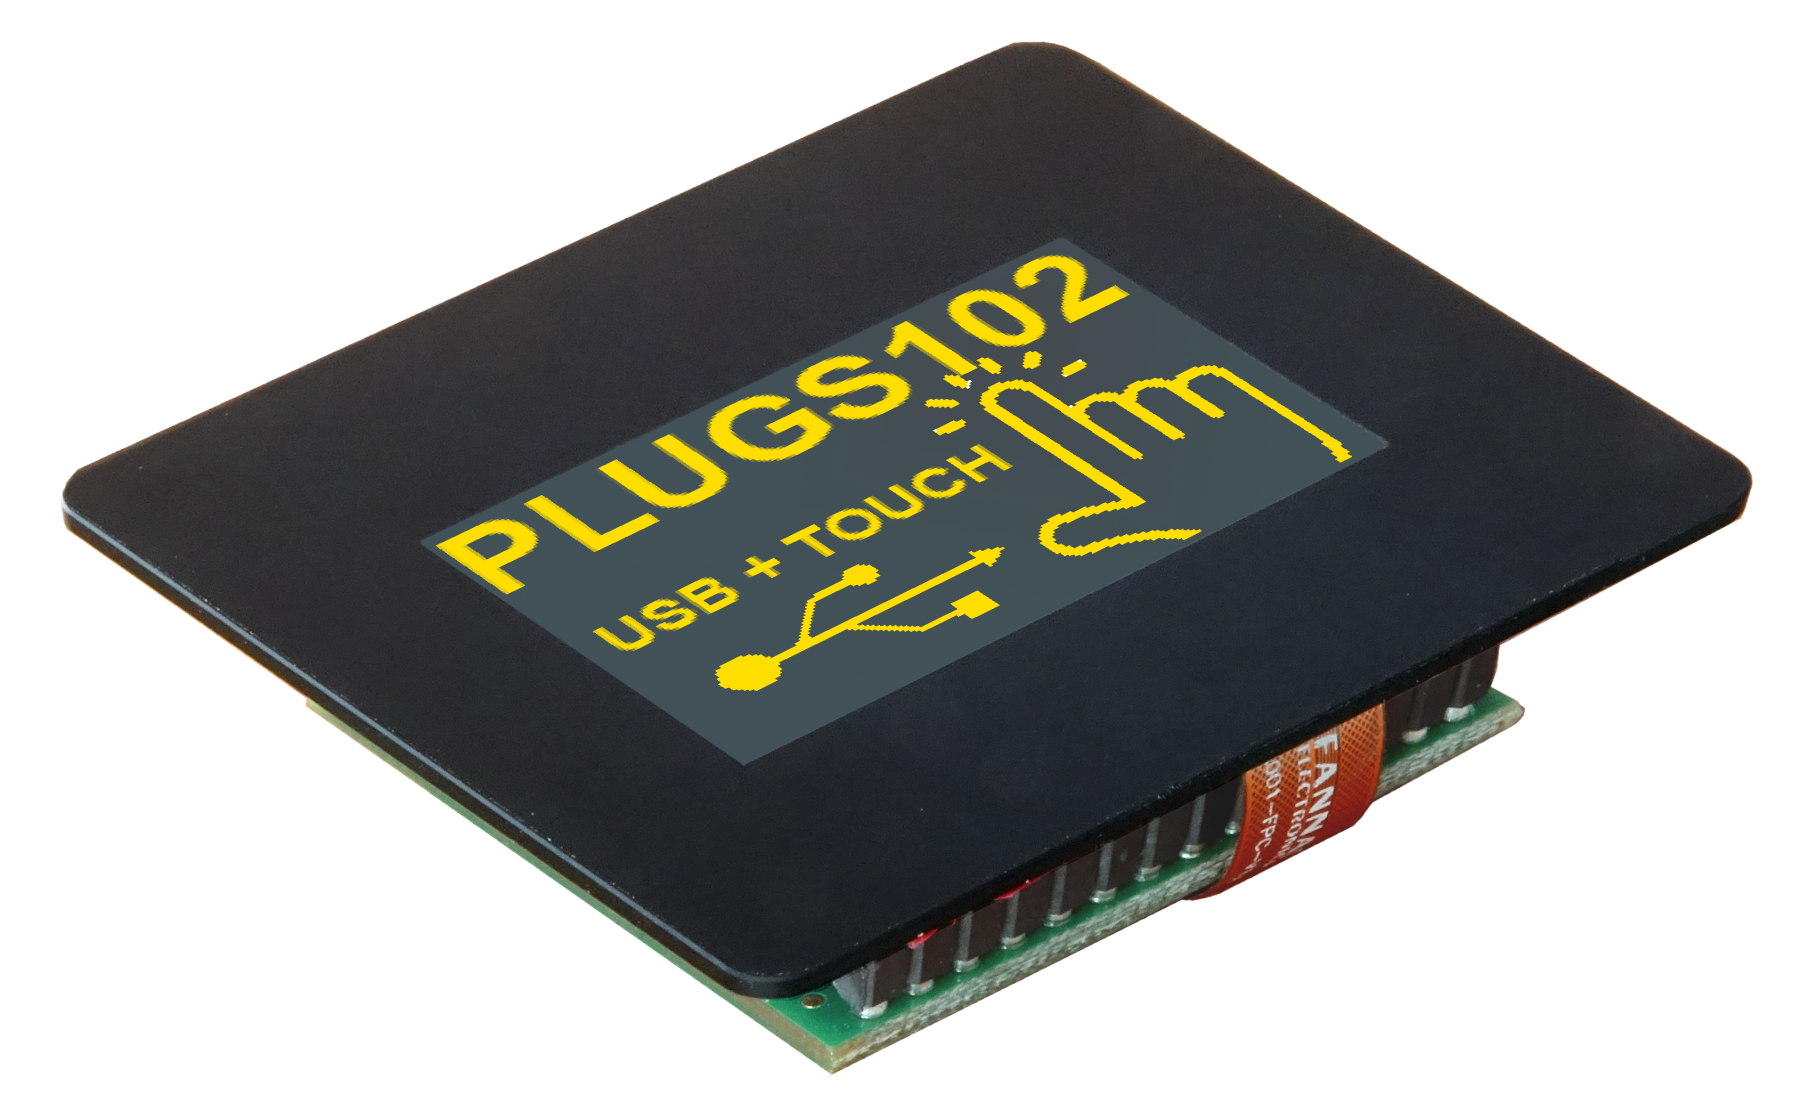 1.7" Intelligent Graphic OLED Display with PCAP touch-screen, USB,  I2C and  SPI InterfaceEA PLUGS102-6GTCZ 